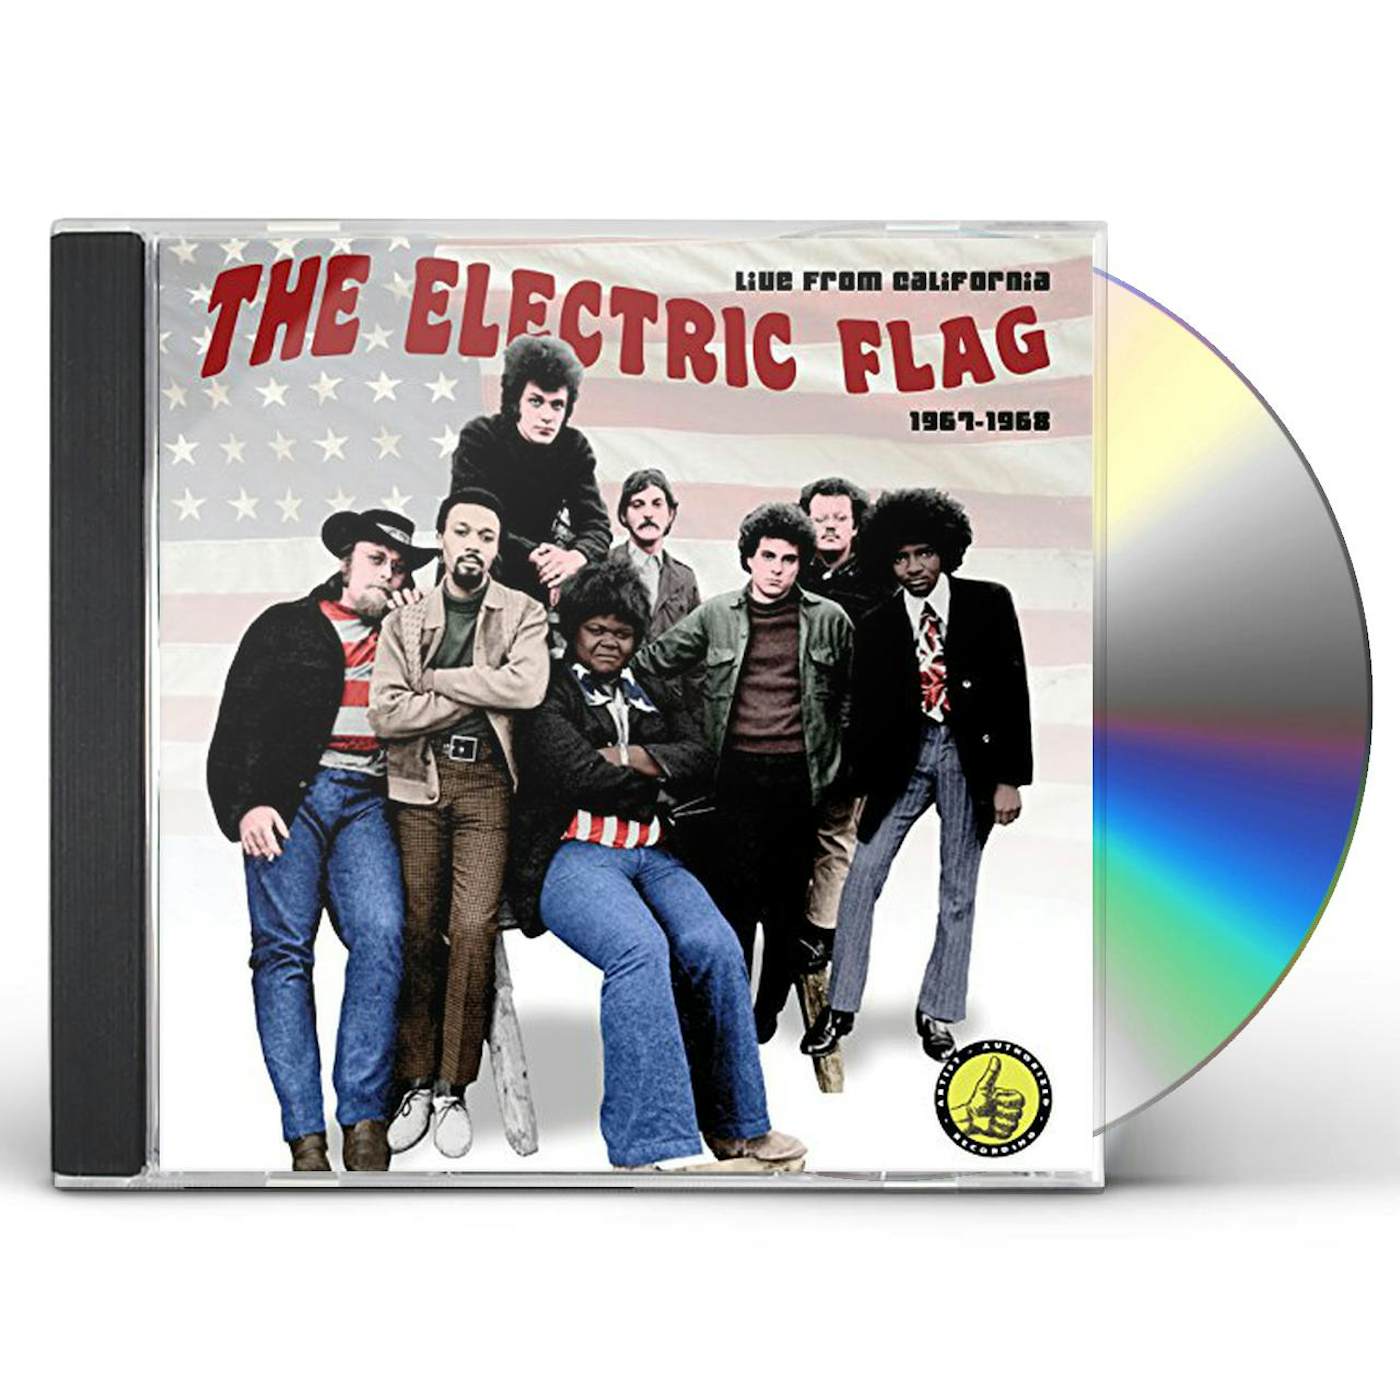 The Electric Flag LIVE IN CALIFORNIA: 1967-1968 CD